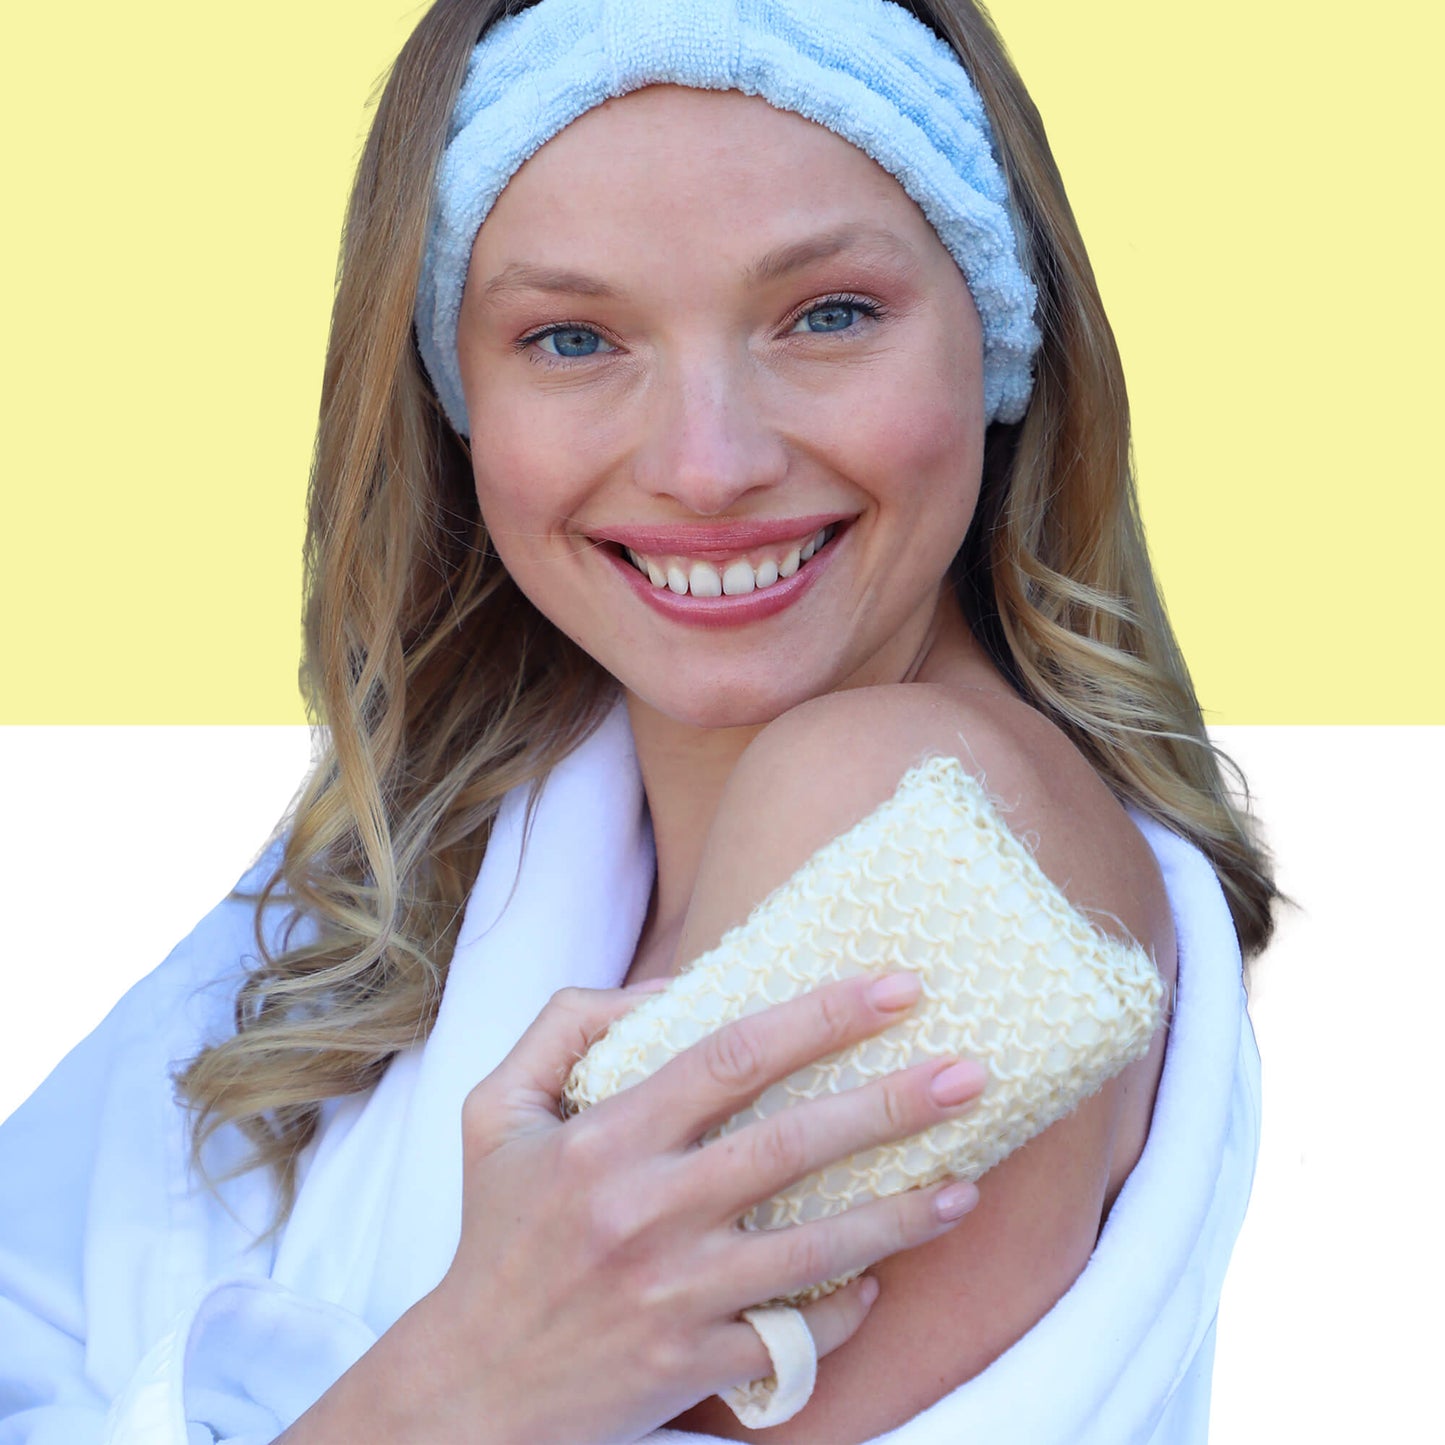 Afterspa Exfoliating Scrubber | Stimulates And Deeply Exfoliates